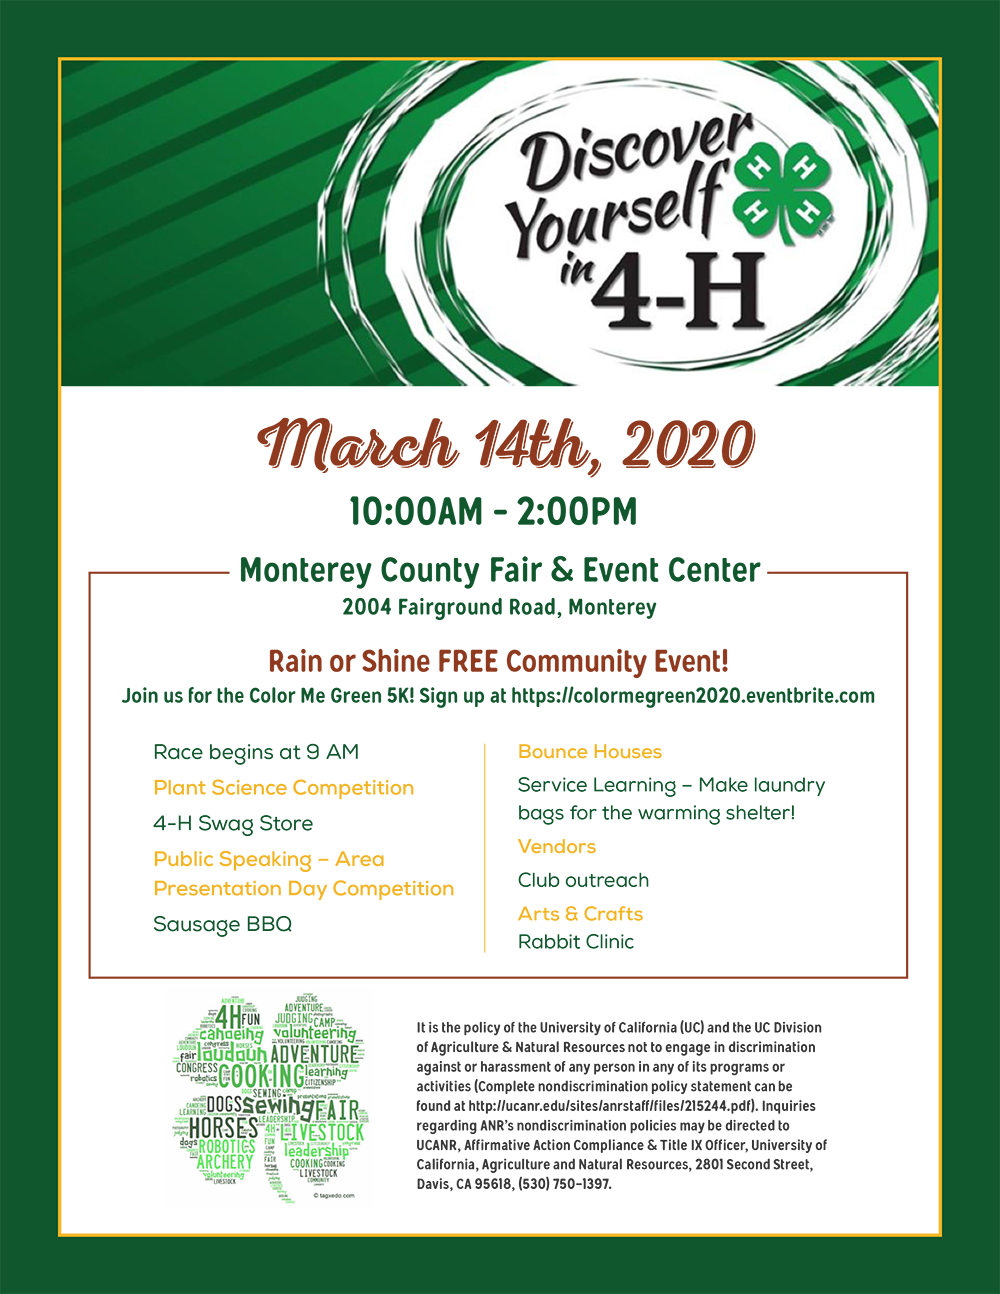 Discover 4-H